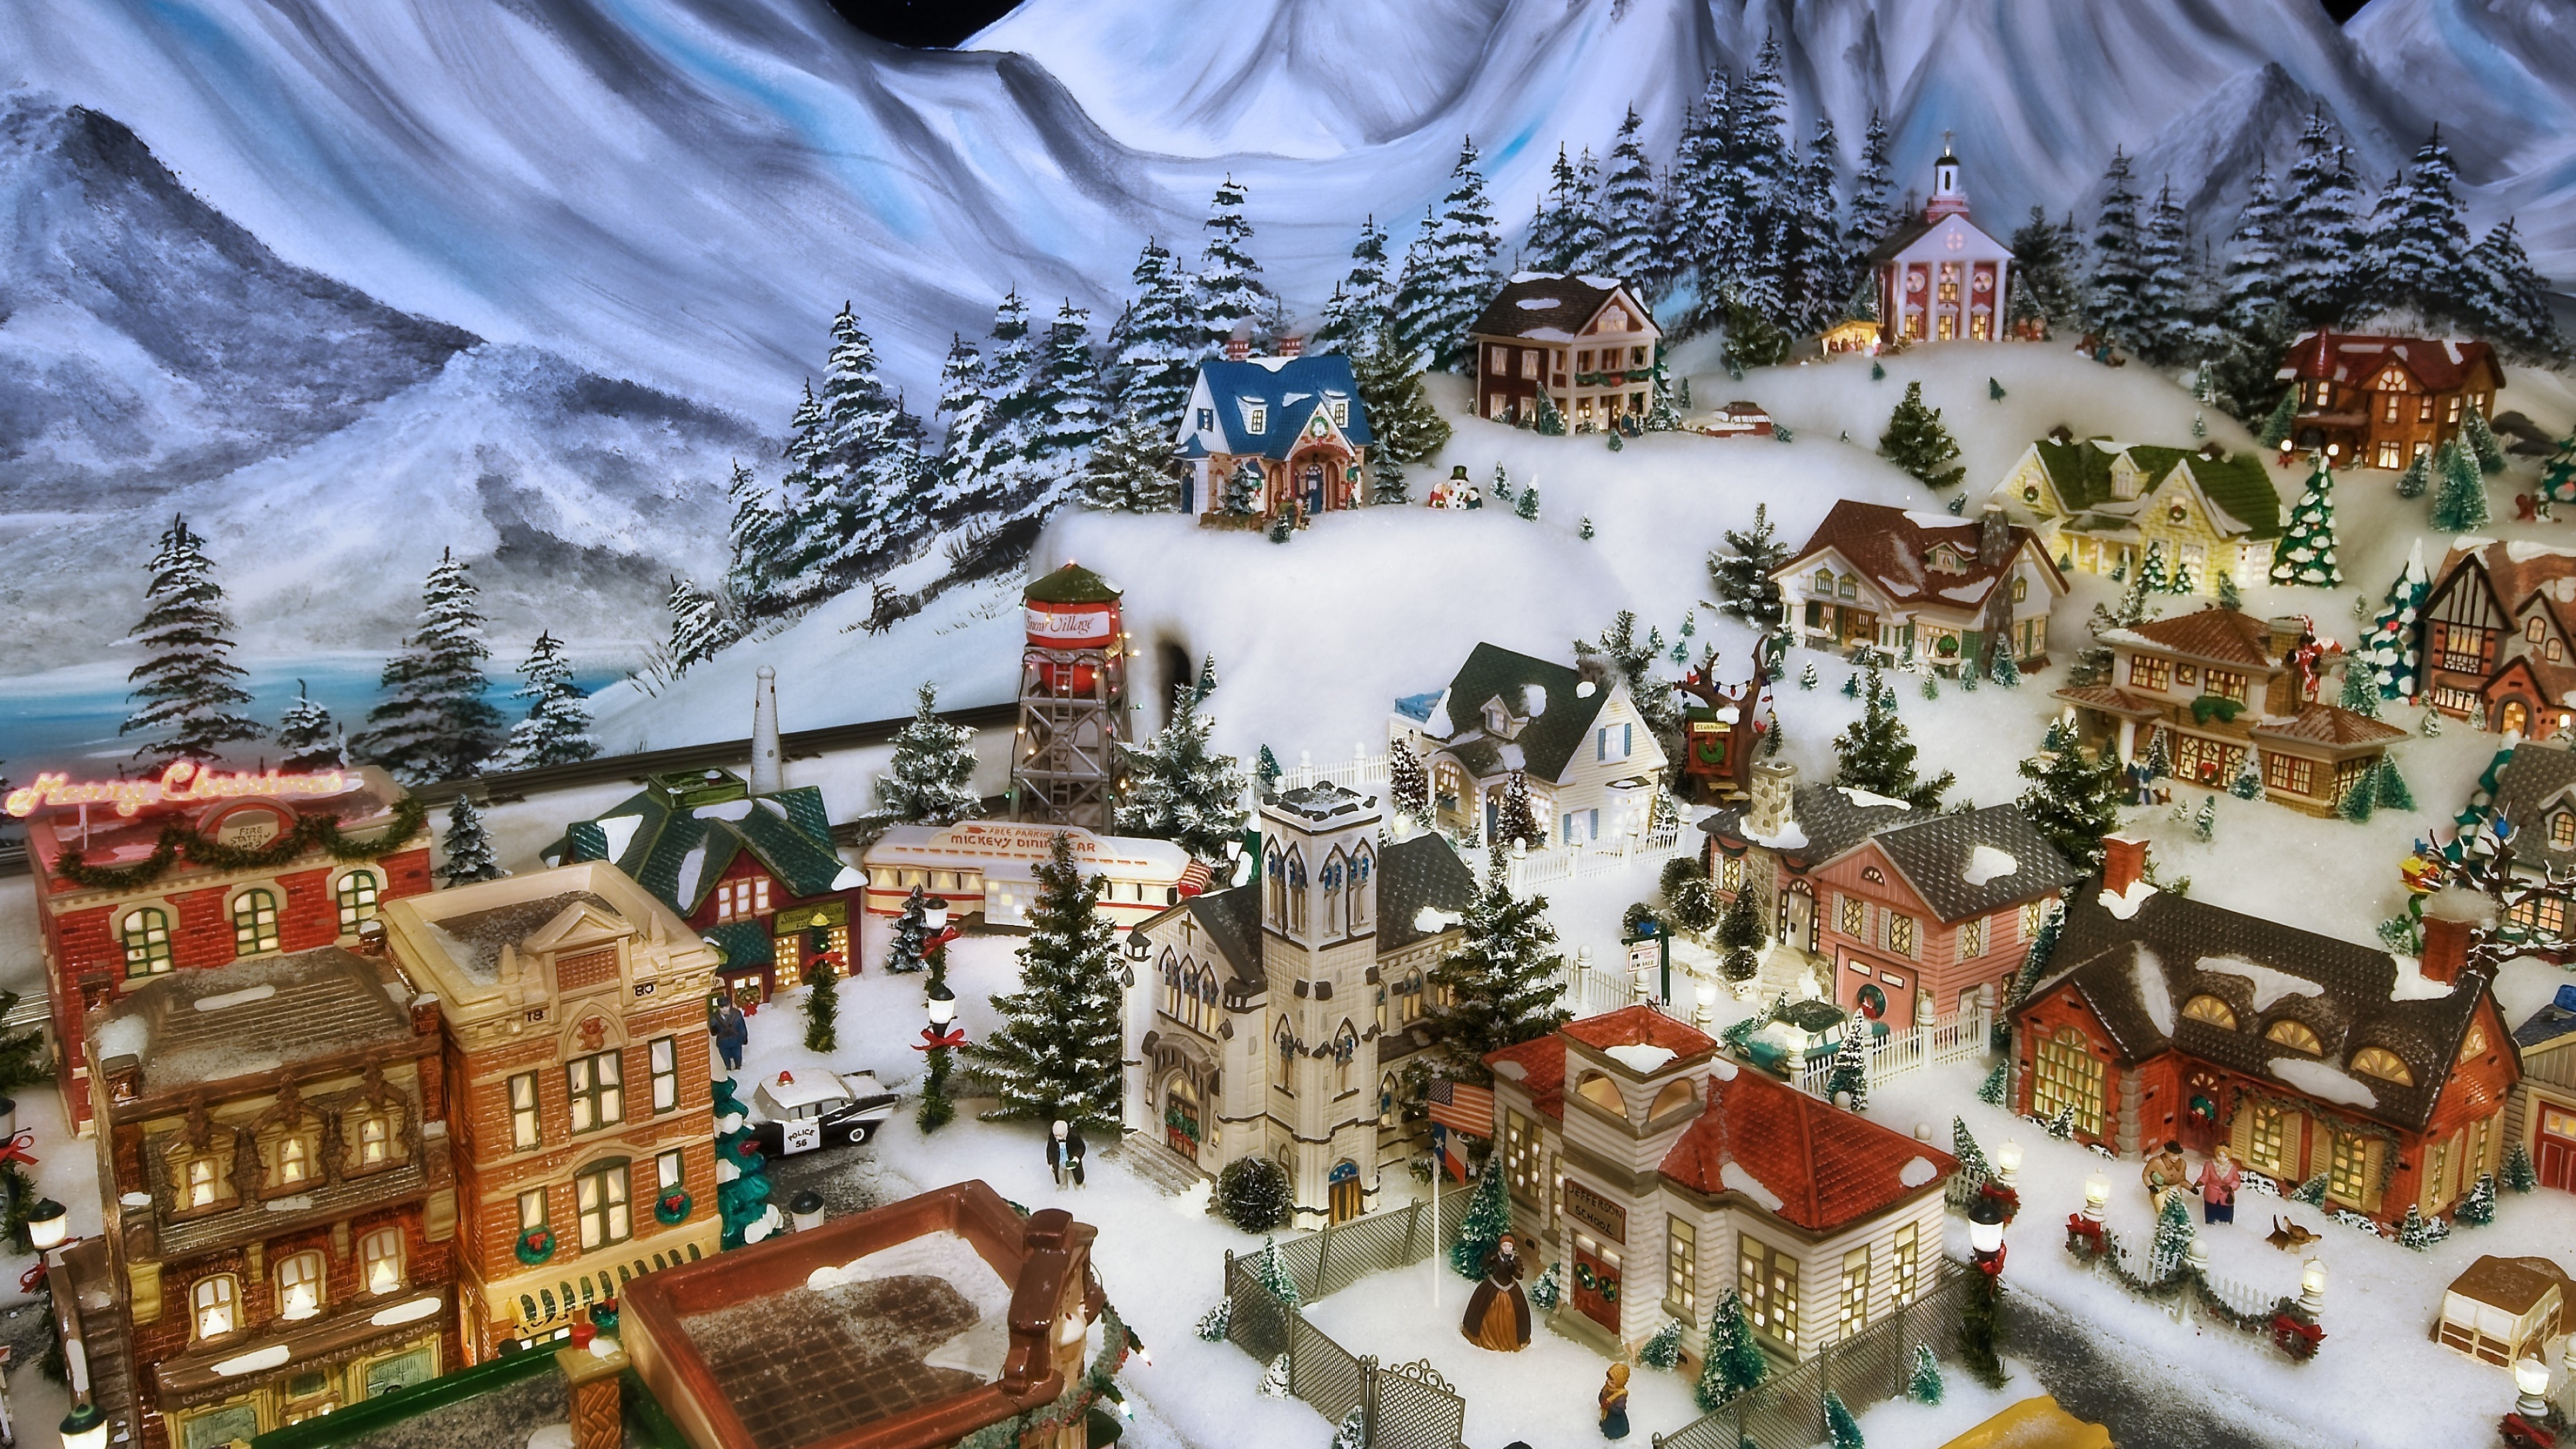 Christmas village, Holiday cheer, Festively decorated, Magical ambiance, 3840x2160 4K Desktop